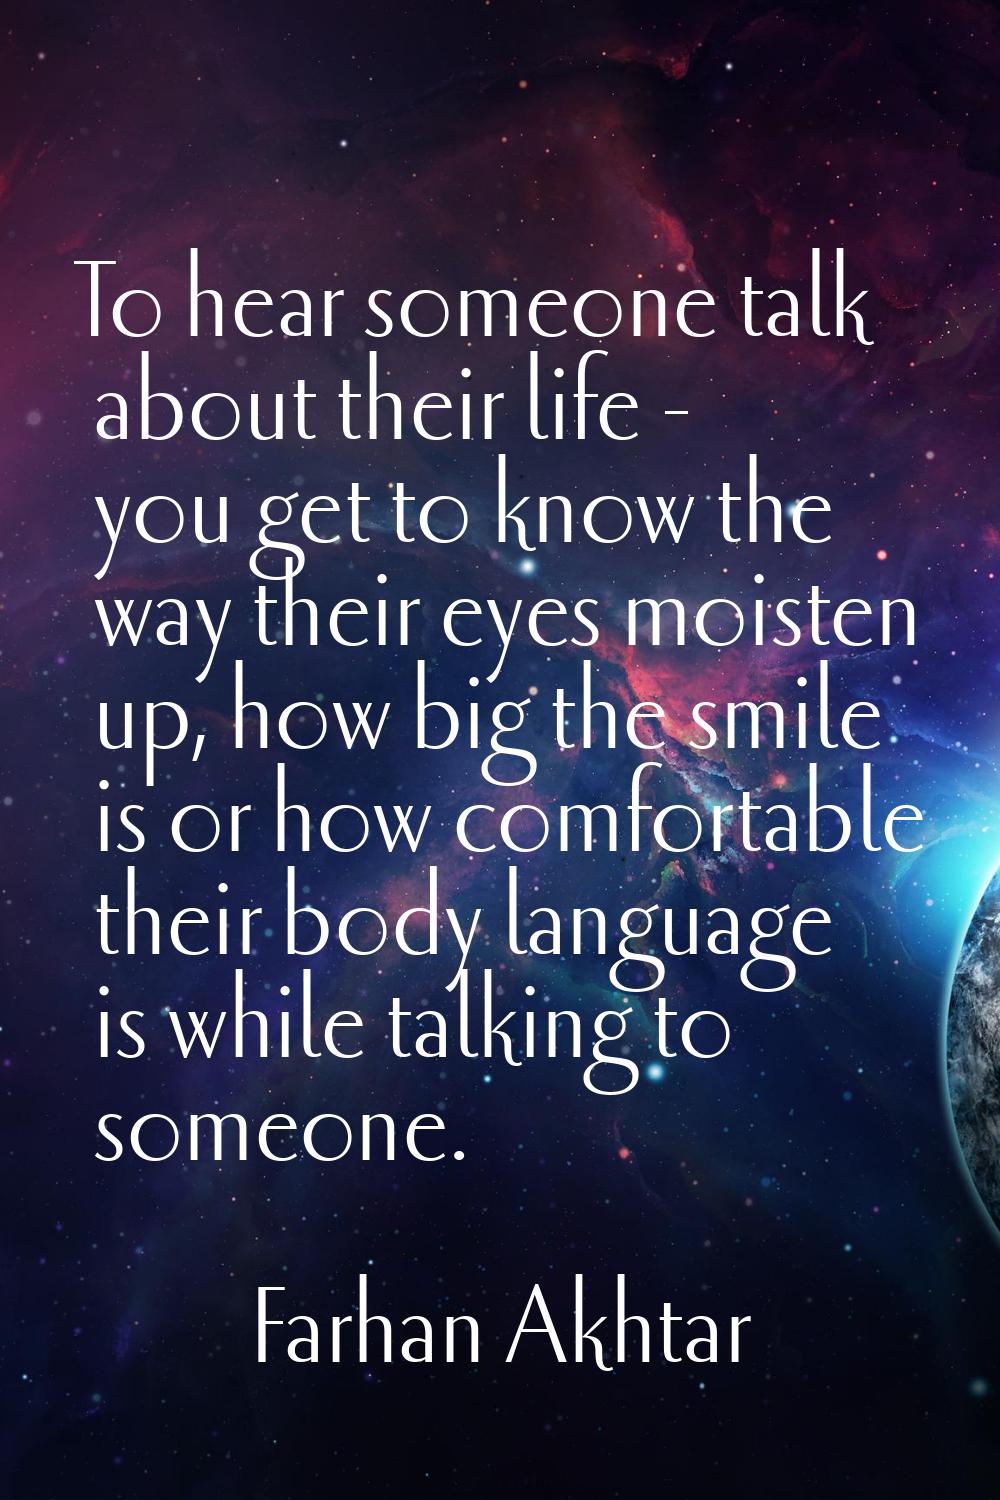 To hear someone talk about their life - you get to know the way their eyes moisten up, how big the 